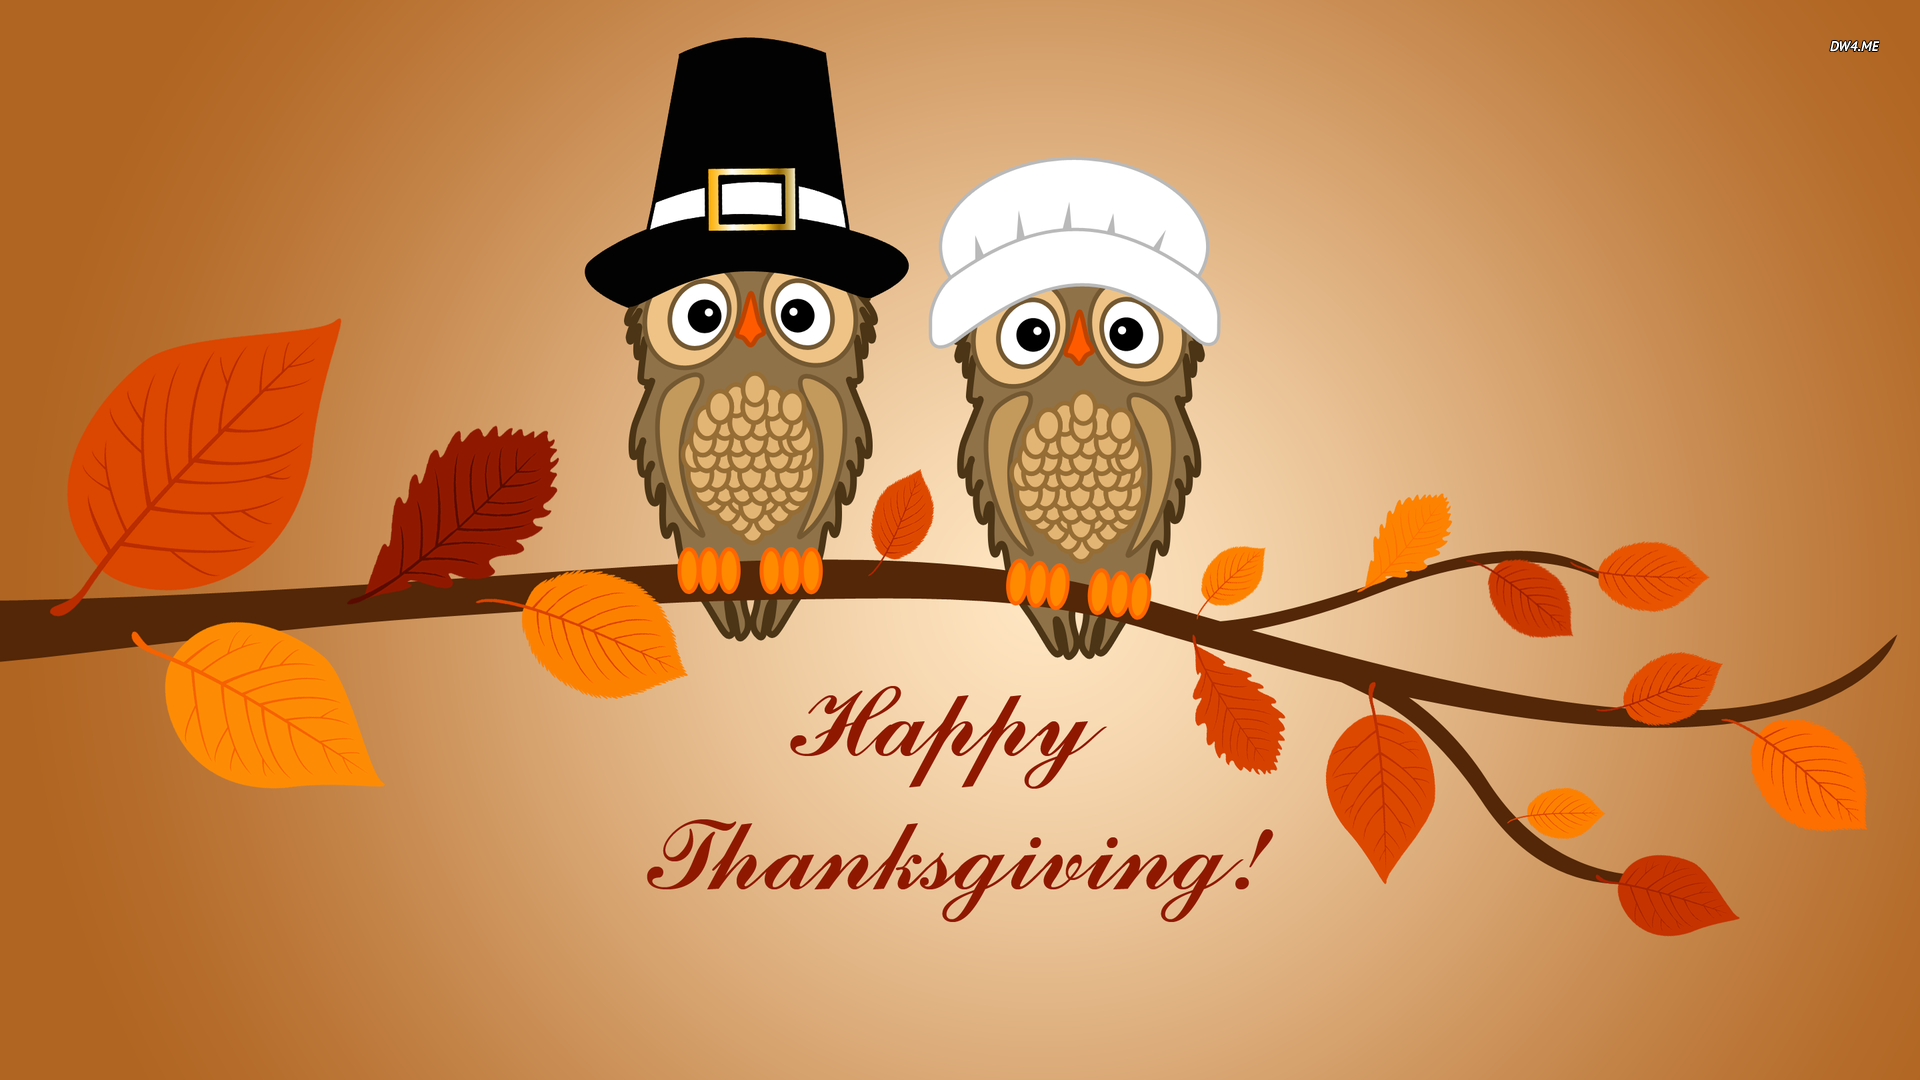 Happy Thanksgiving Pictures images Pics Photos Wallpaper 2014